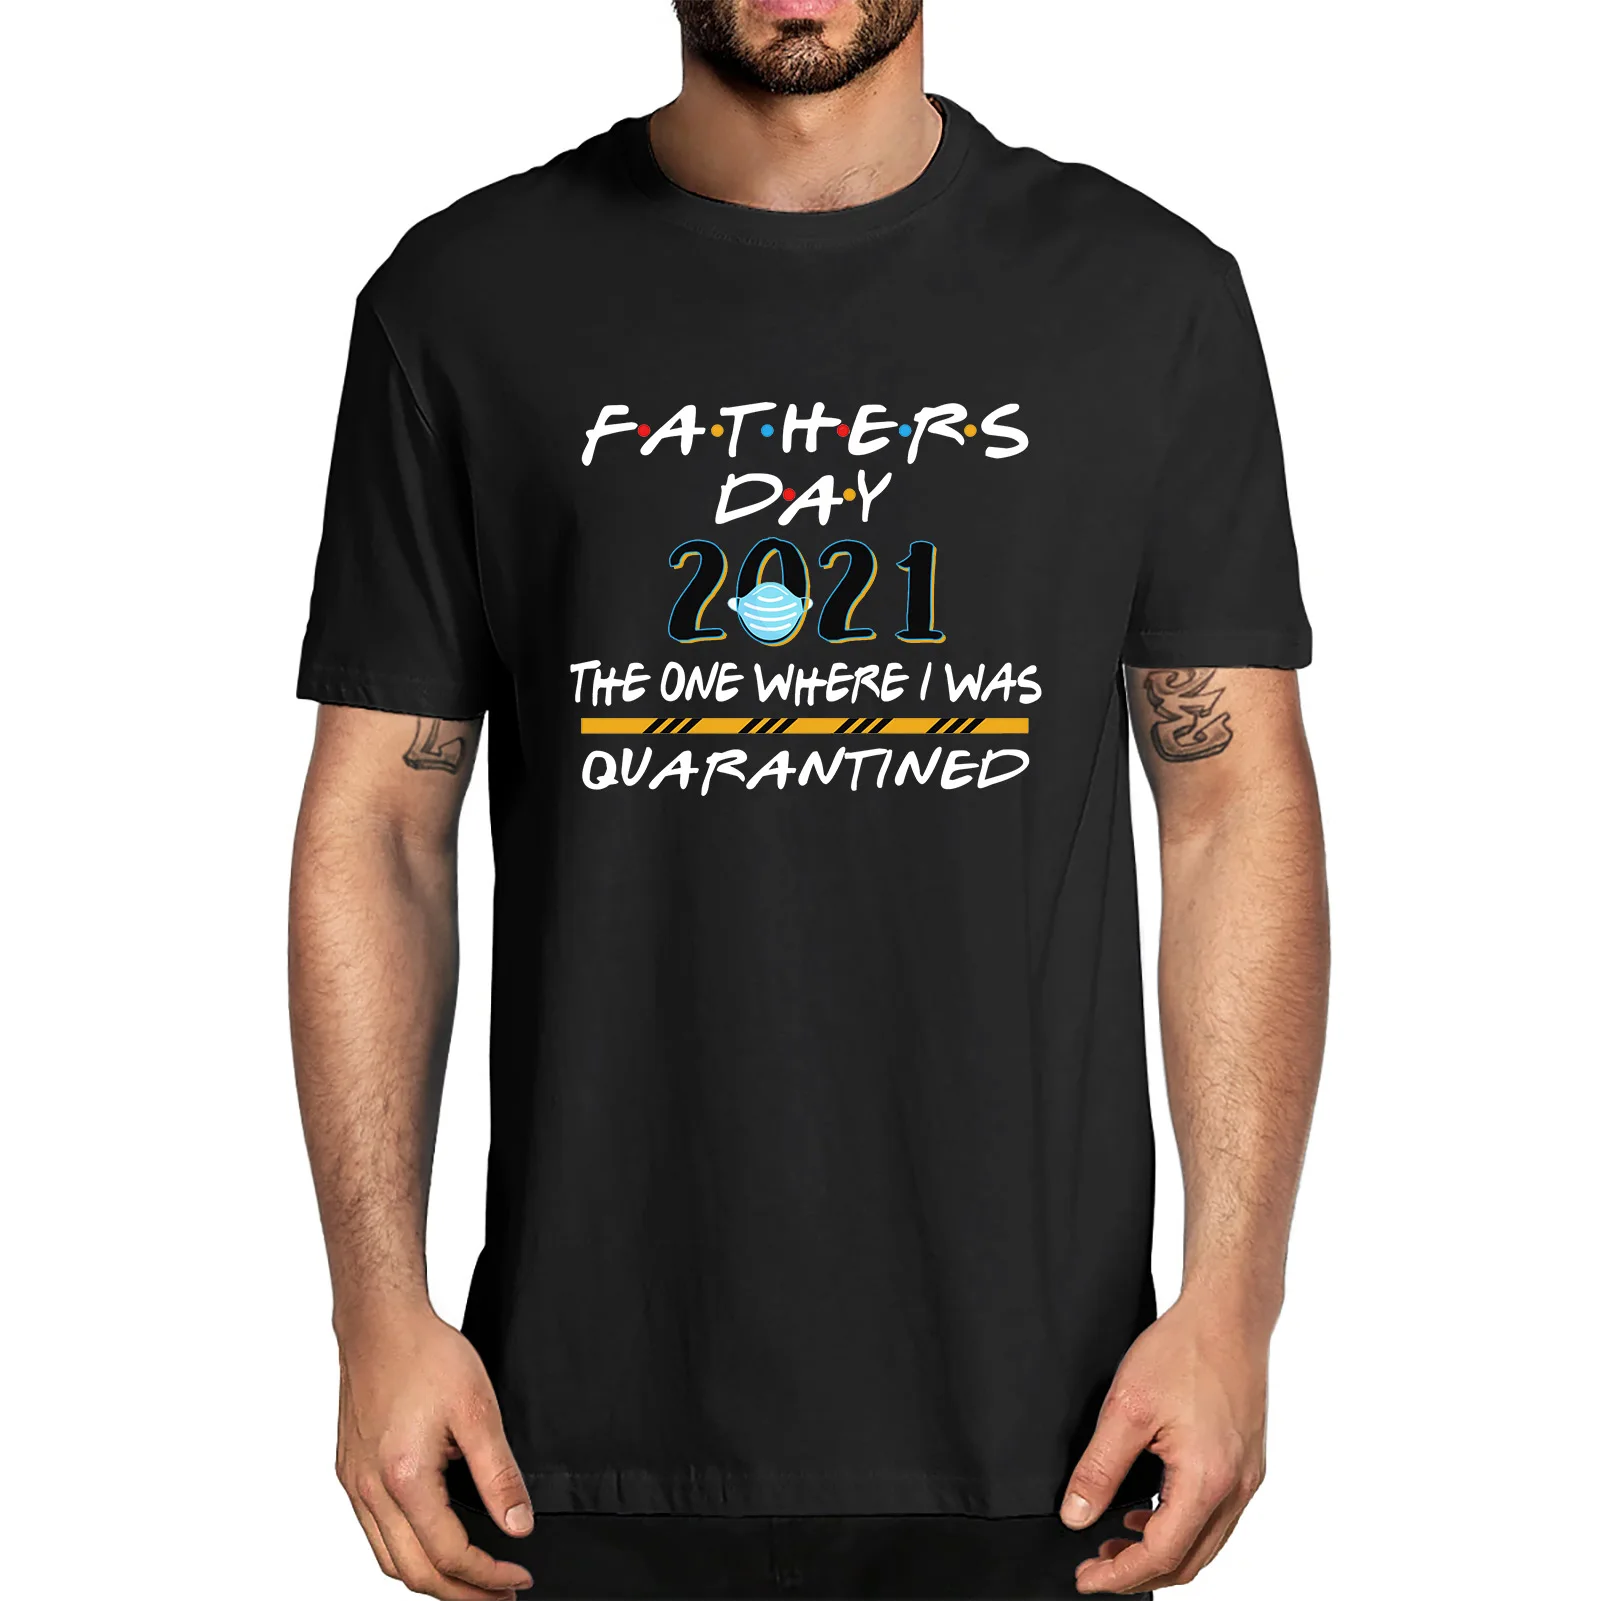 

Unisex Fathers Day 2021 The one Where I was Quarantined Fathers Day Shirt Vintage Funny Tshirt Men's 100% Cotton Novelty T-Shirt